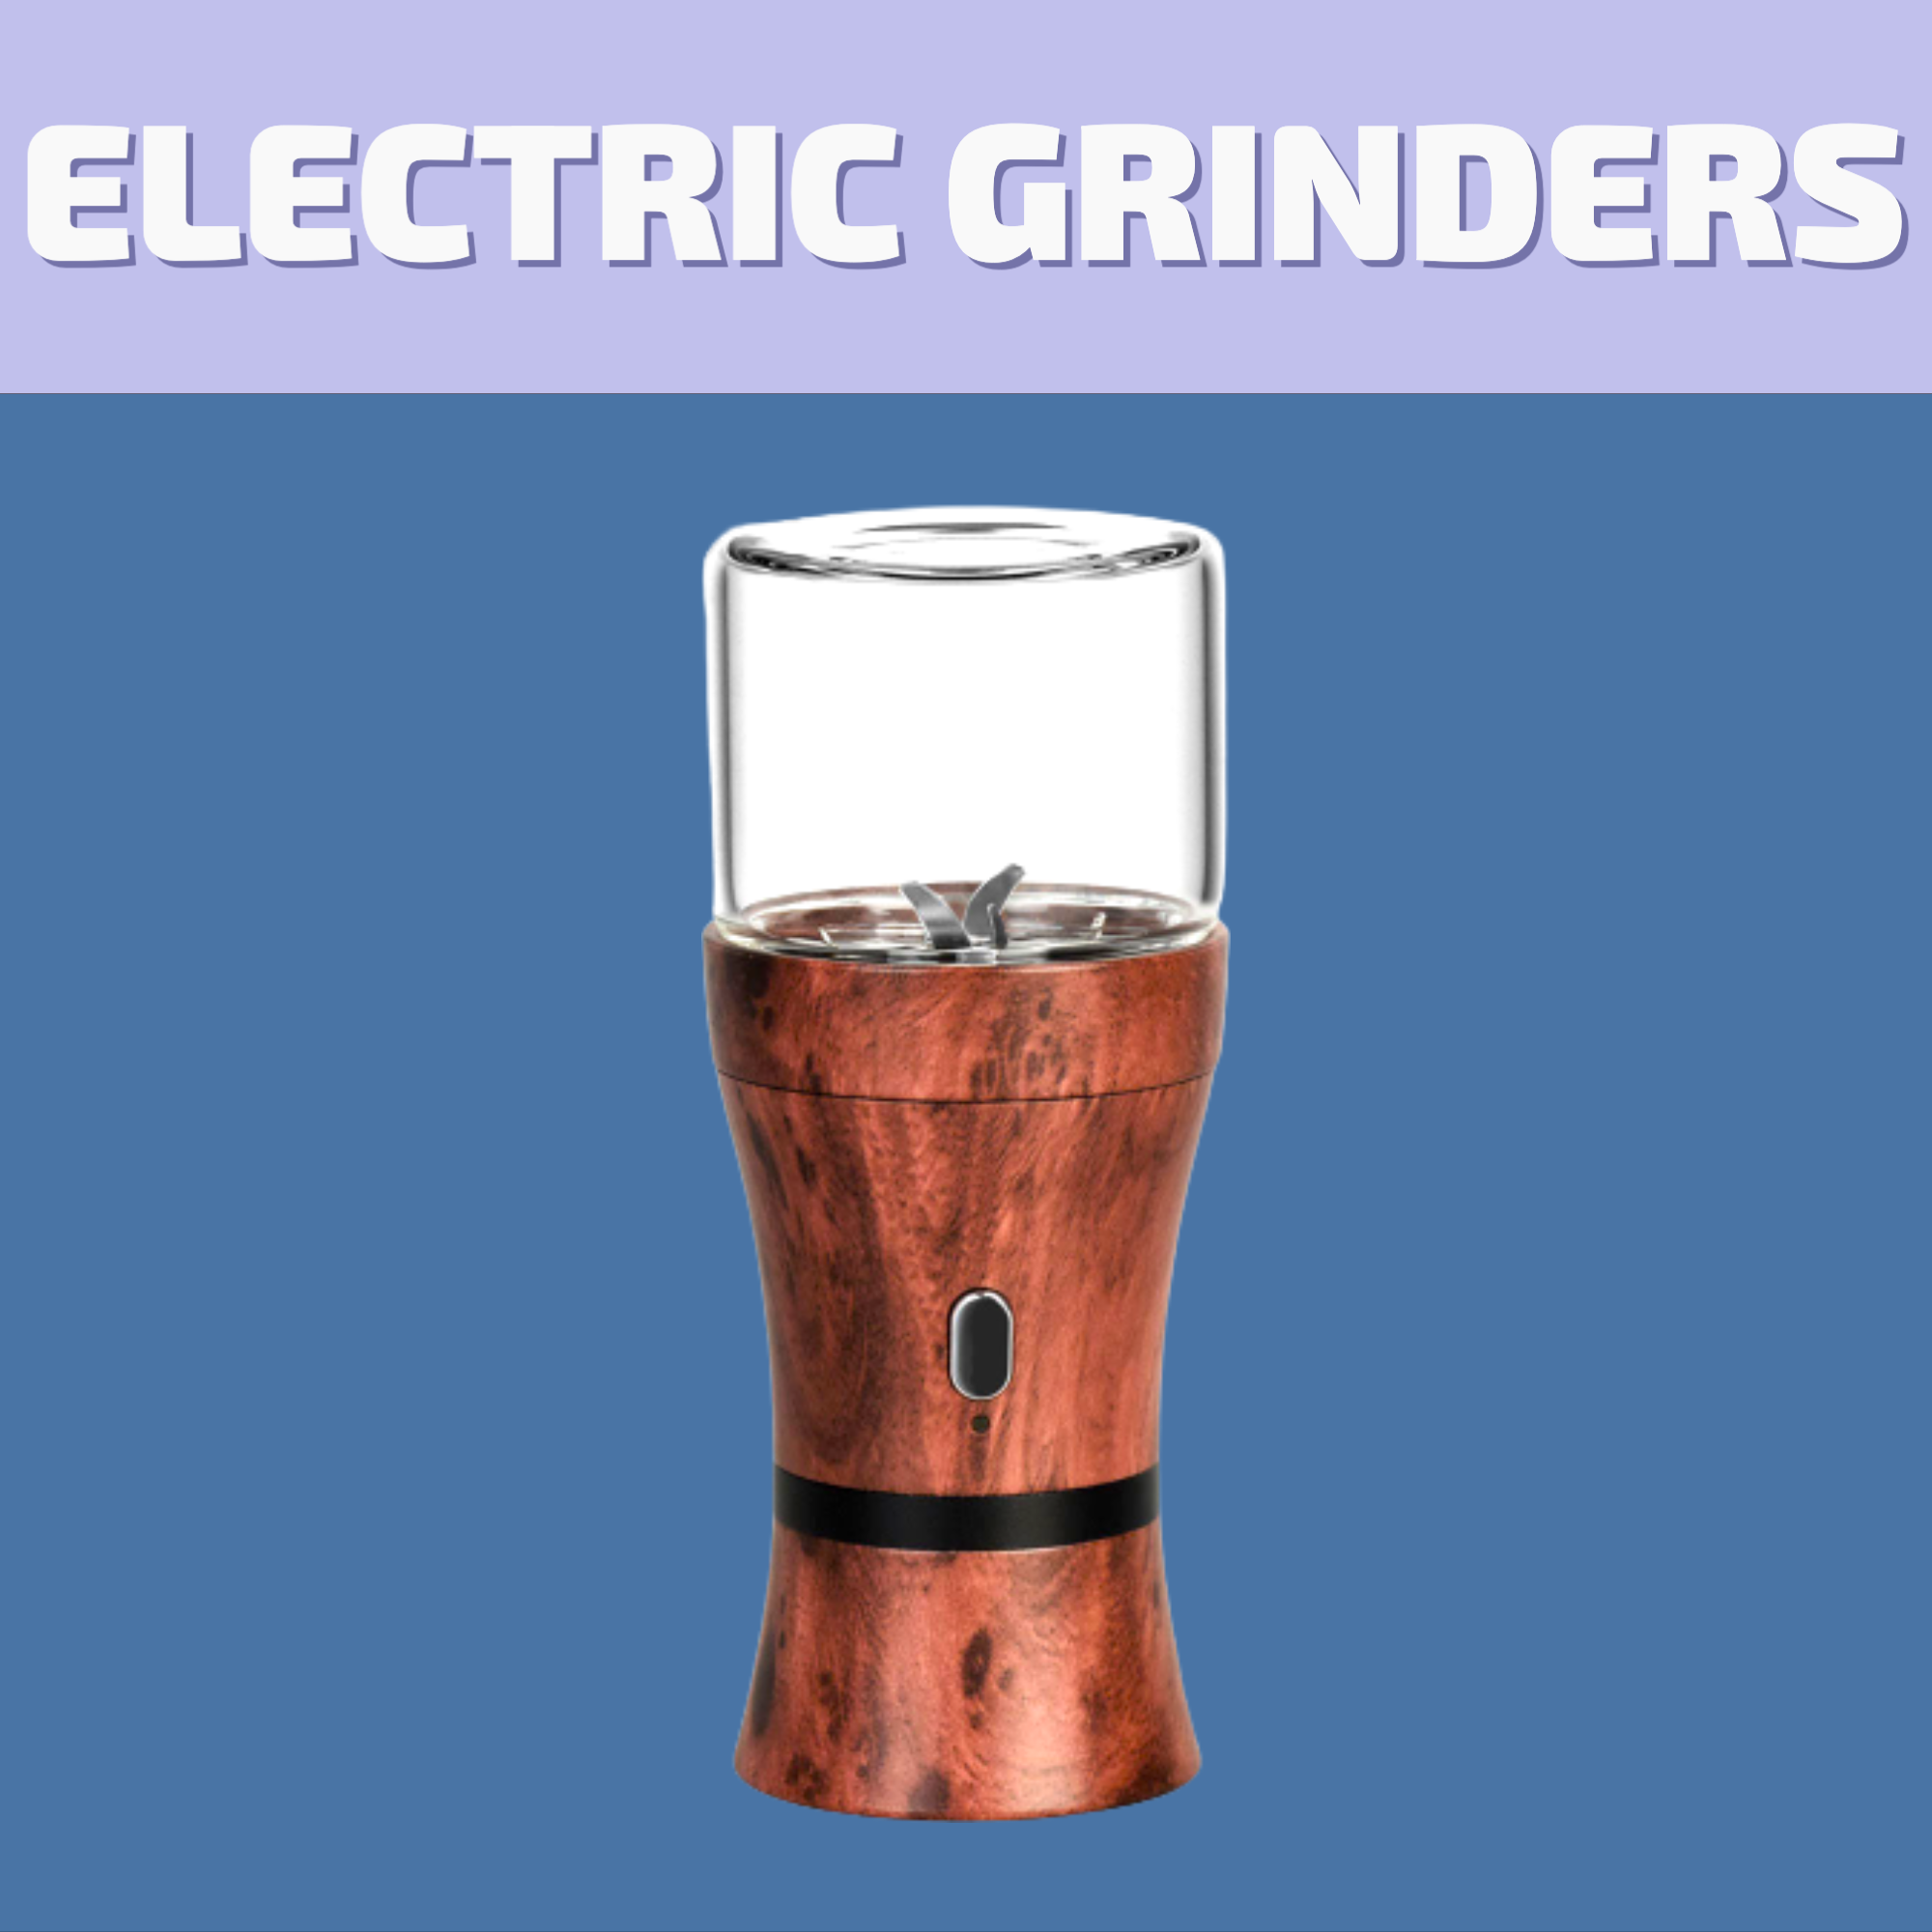 Shop Winnipeg's best selection of Electric Grinders and Metal Grinders for same day delivery or buy them in-store.   